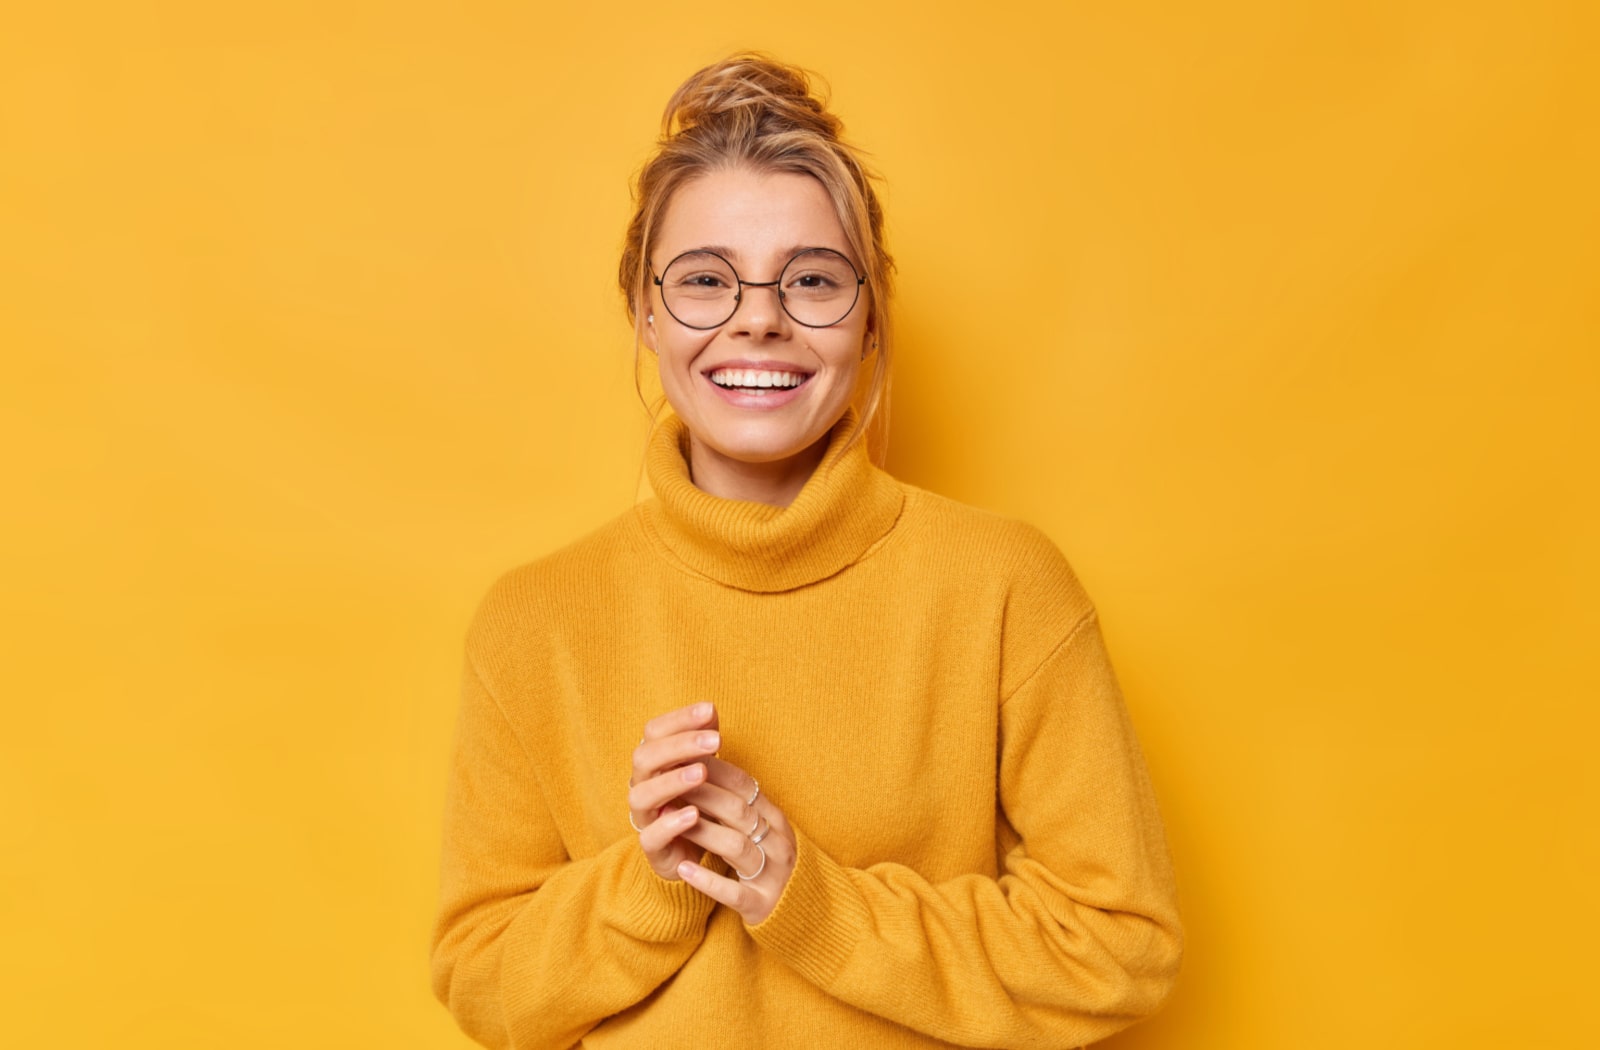 A young woman wearing a bright yellow sweater, also wearing glasses and smiling, leaning against a yellow background